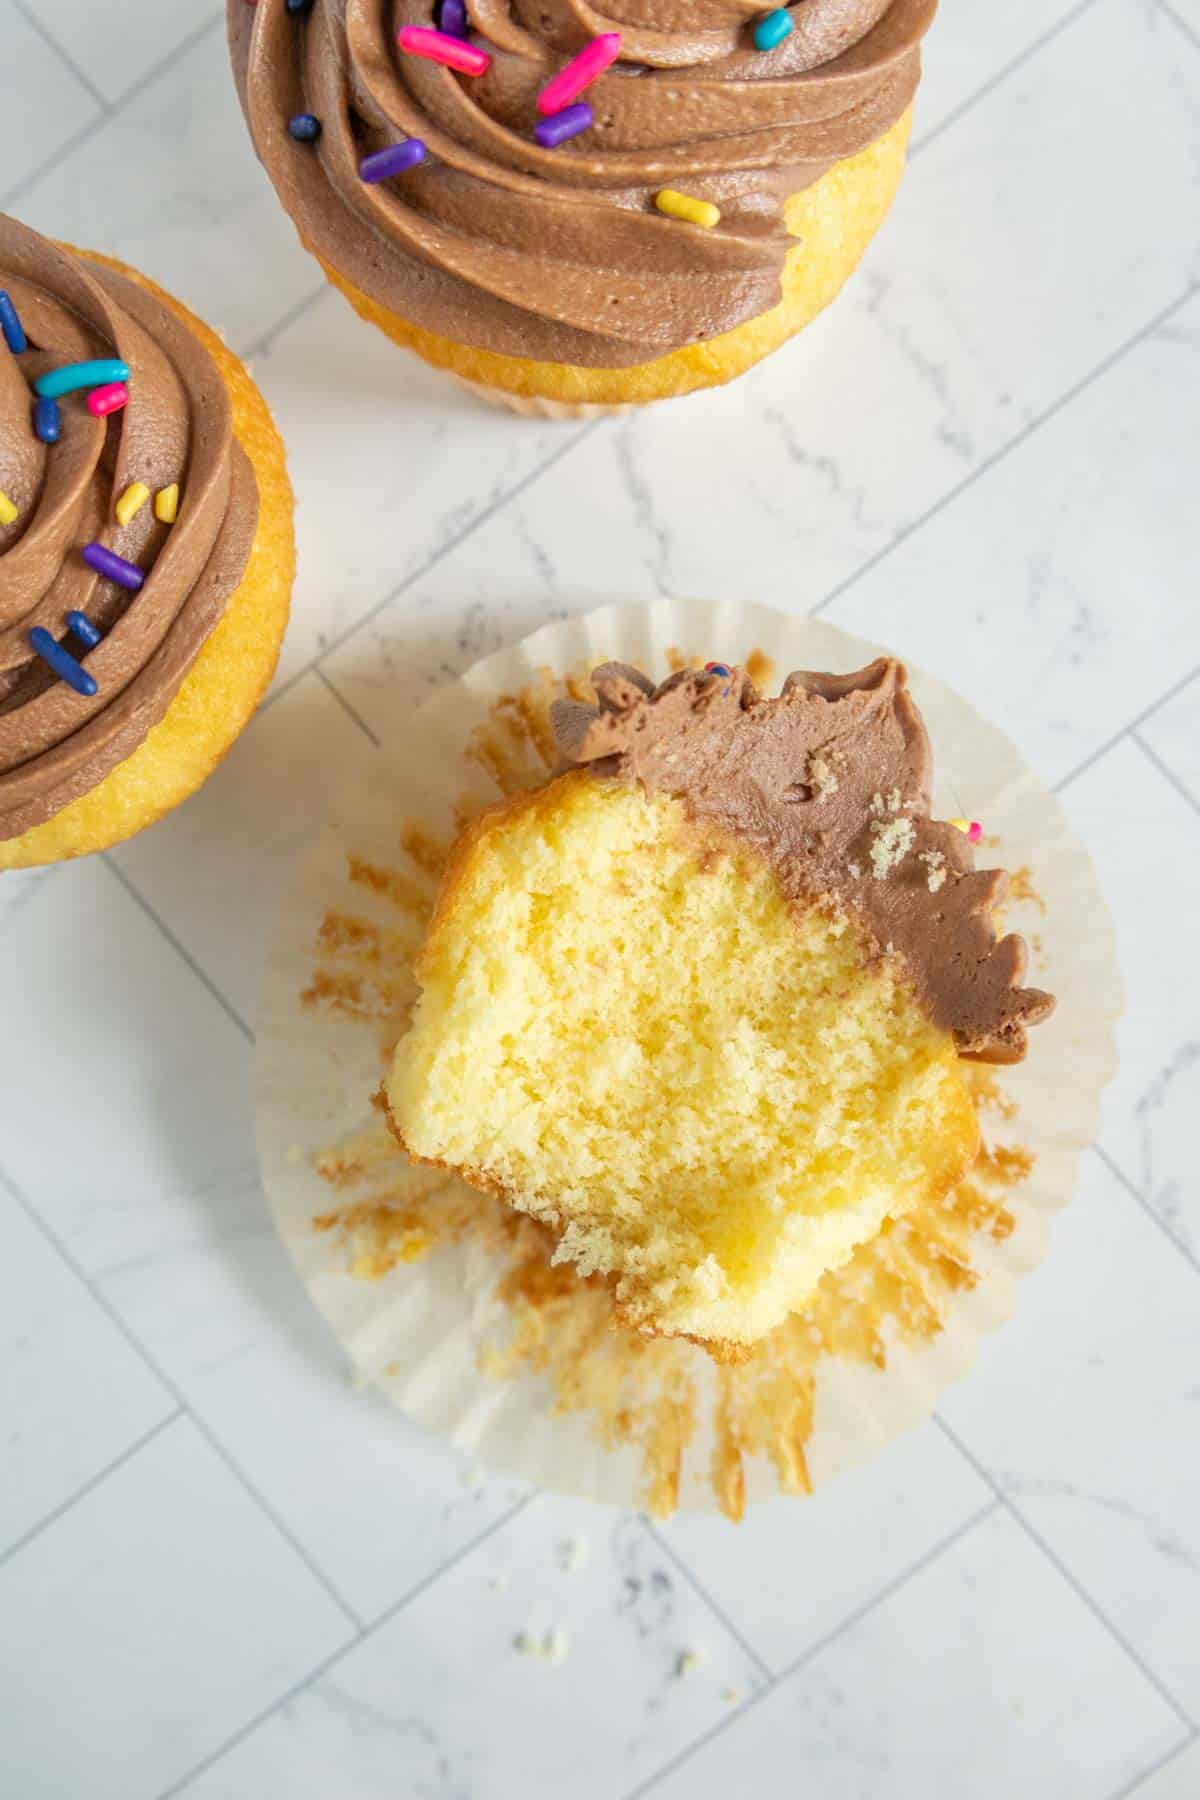 A partially eaten yellow cupcake with chocolate frosting and sprinkles, placed on a white wrapper, with two additional frosted cupcakes nearby on a light marble surface.